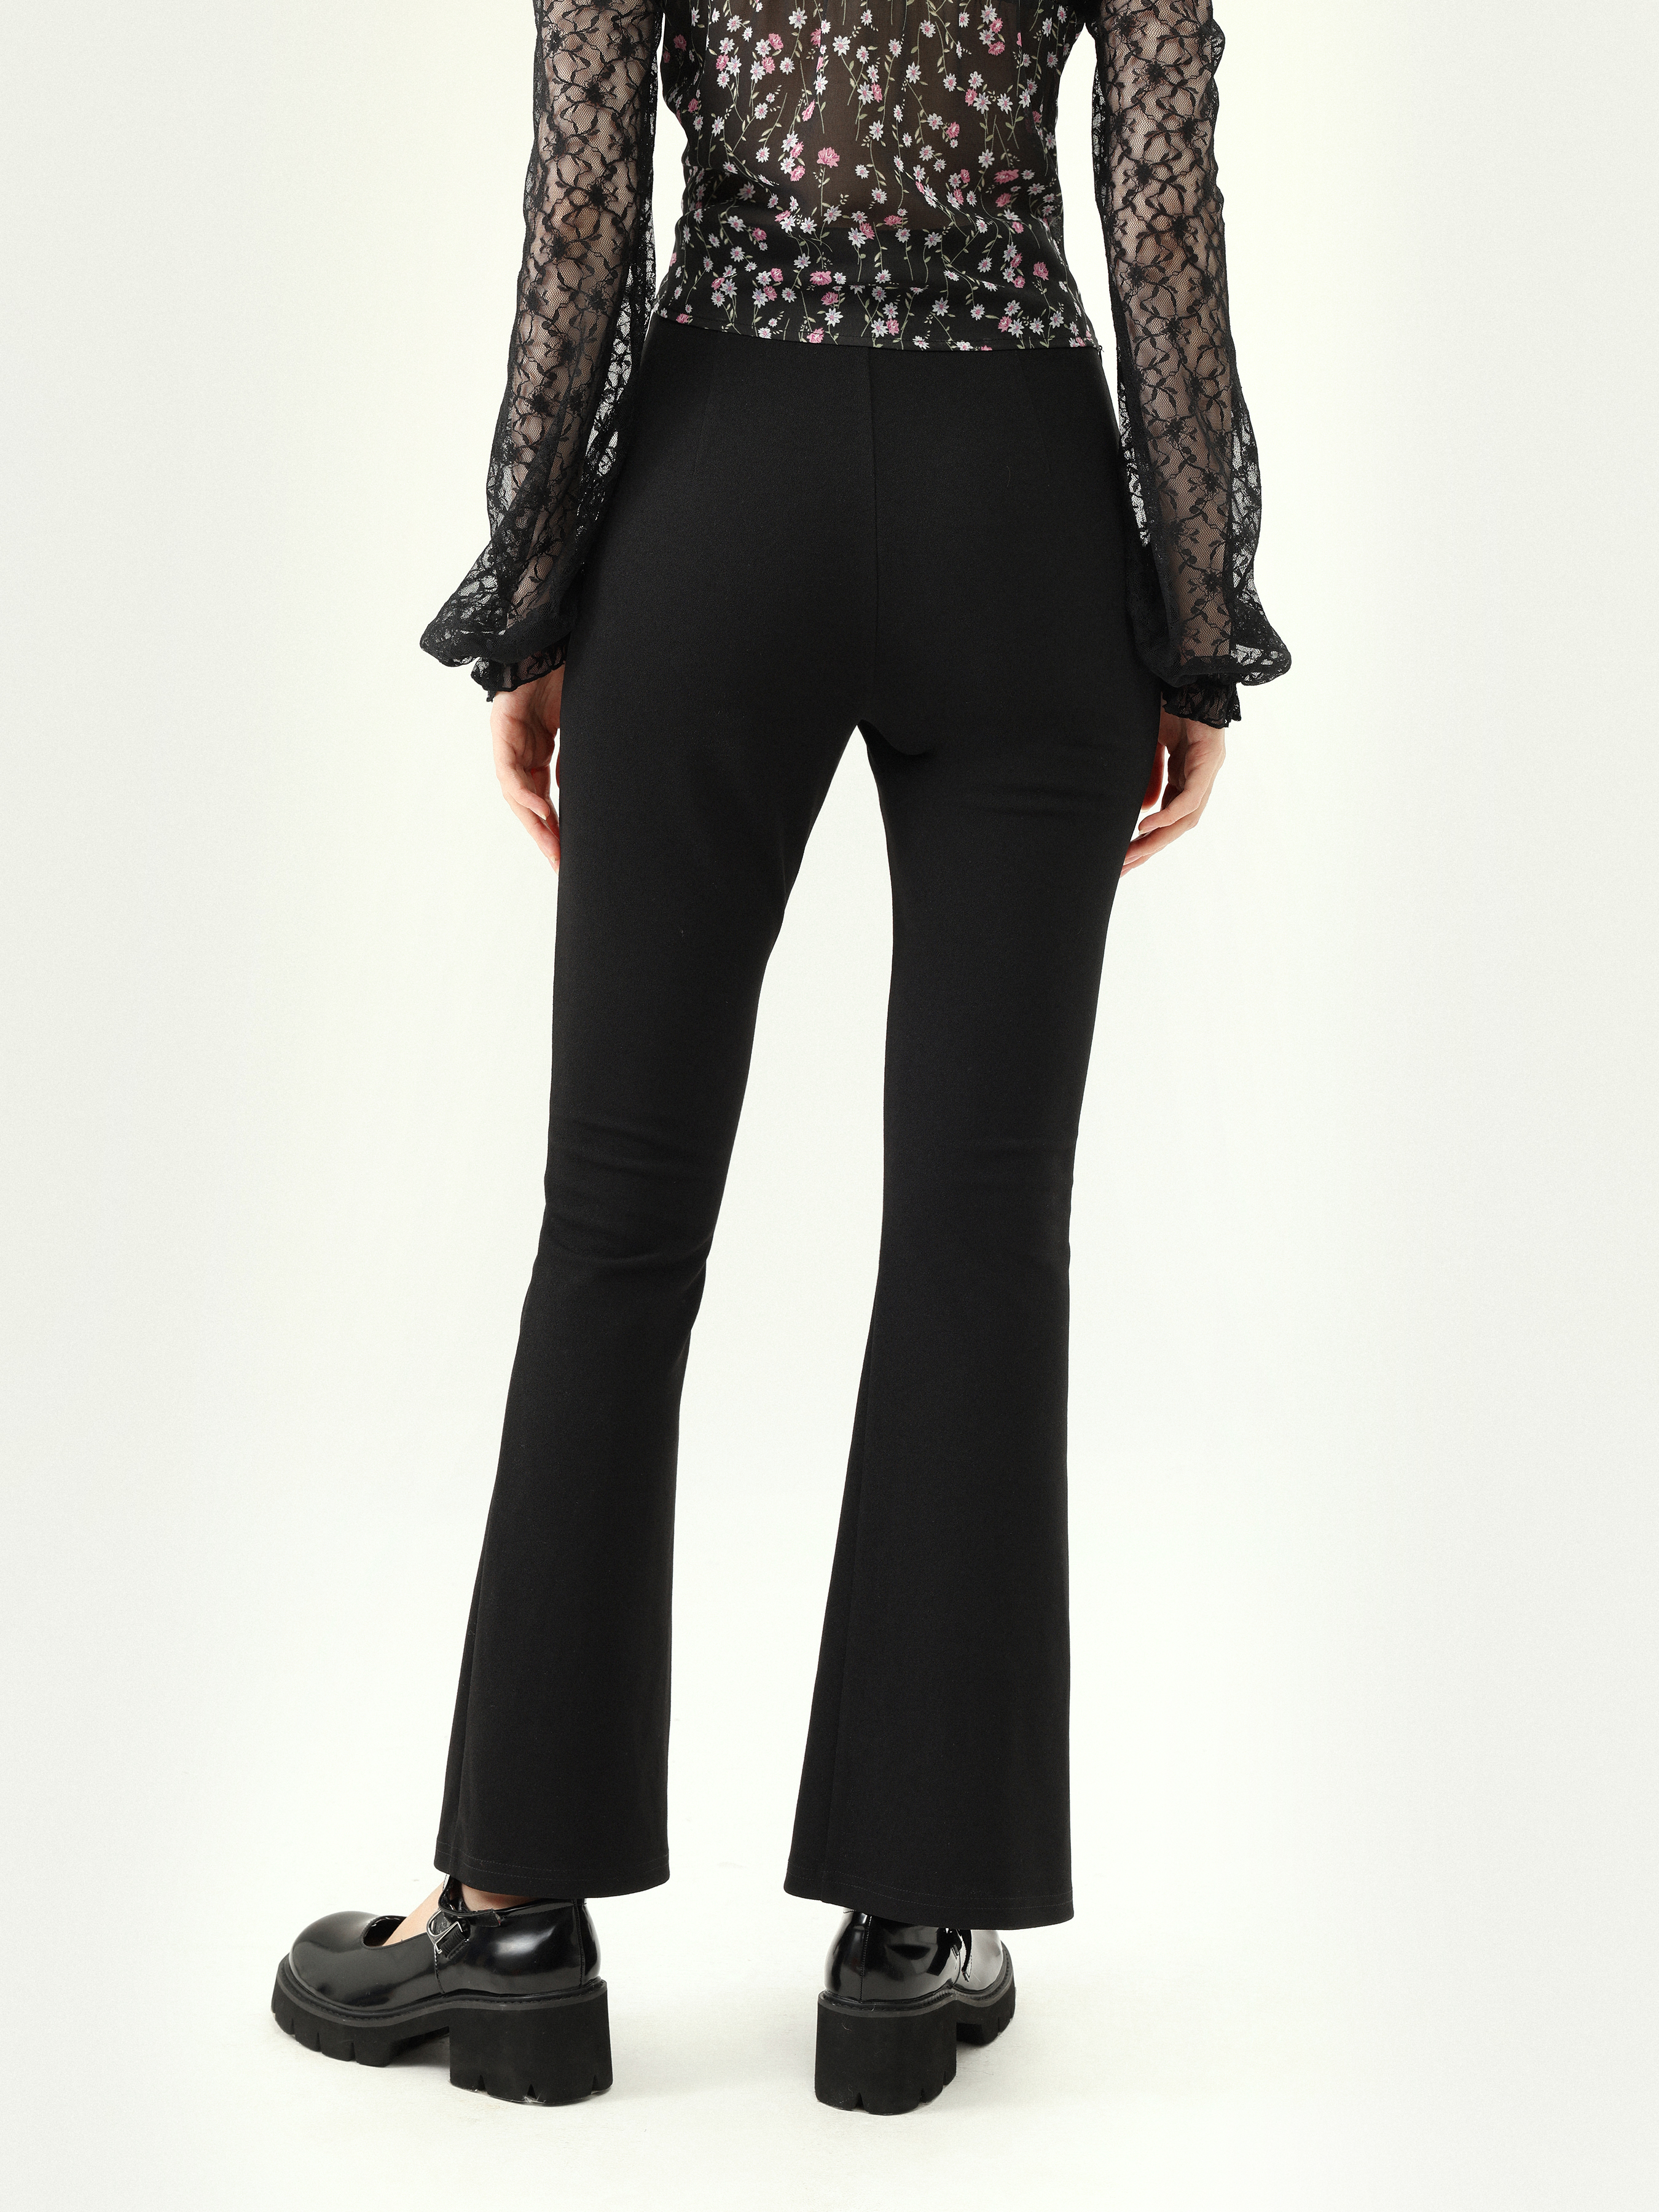 Lace Mid Rise Legging Trousers - Cider